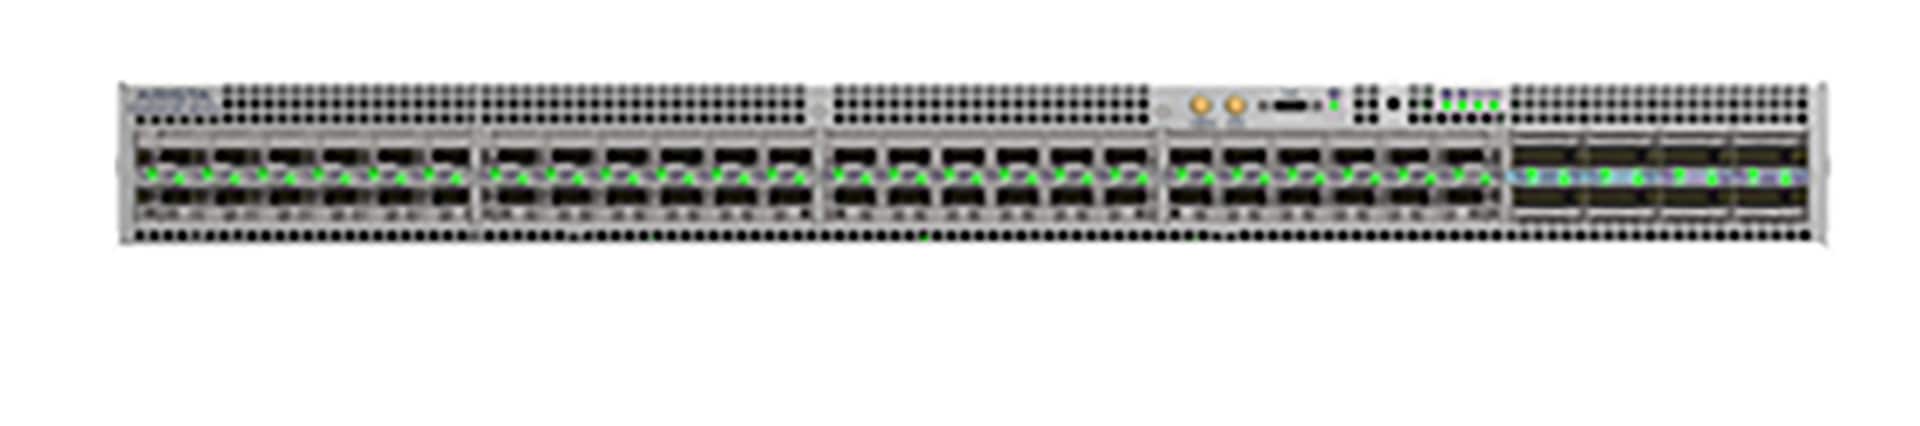 Arista 7280R3A 48x50GbE SFP and 6x200G QSFP Switch Router